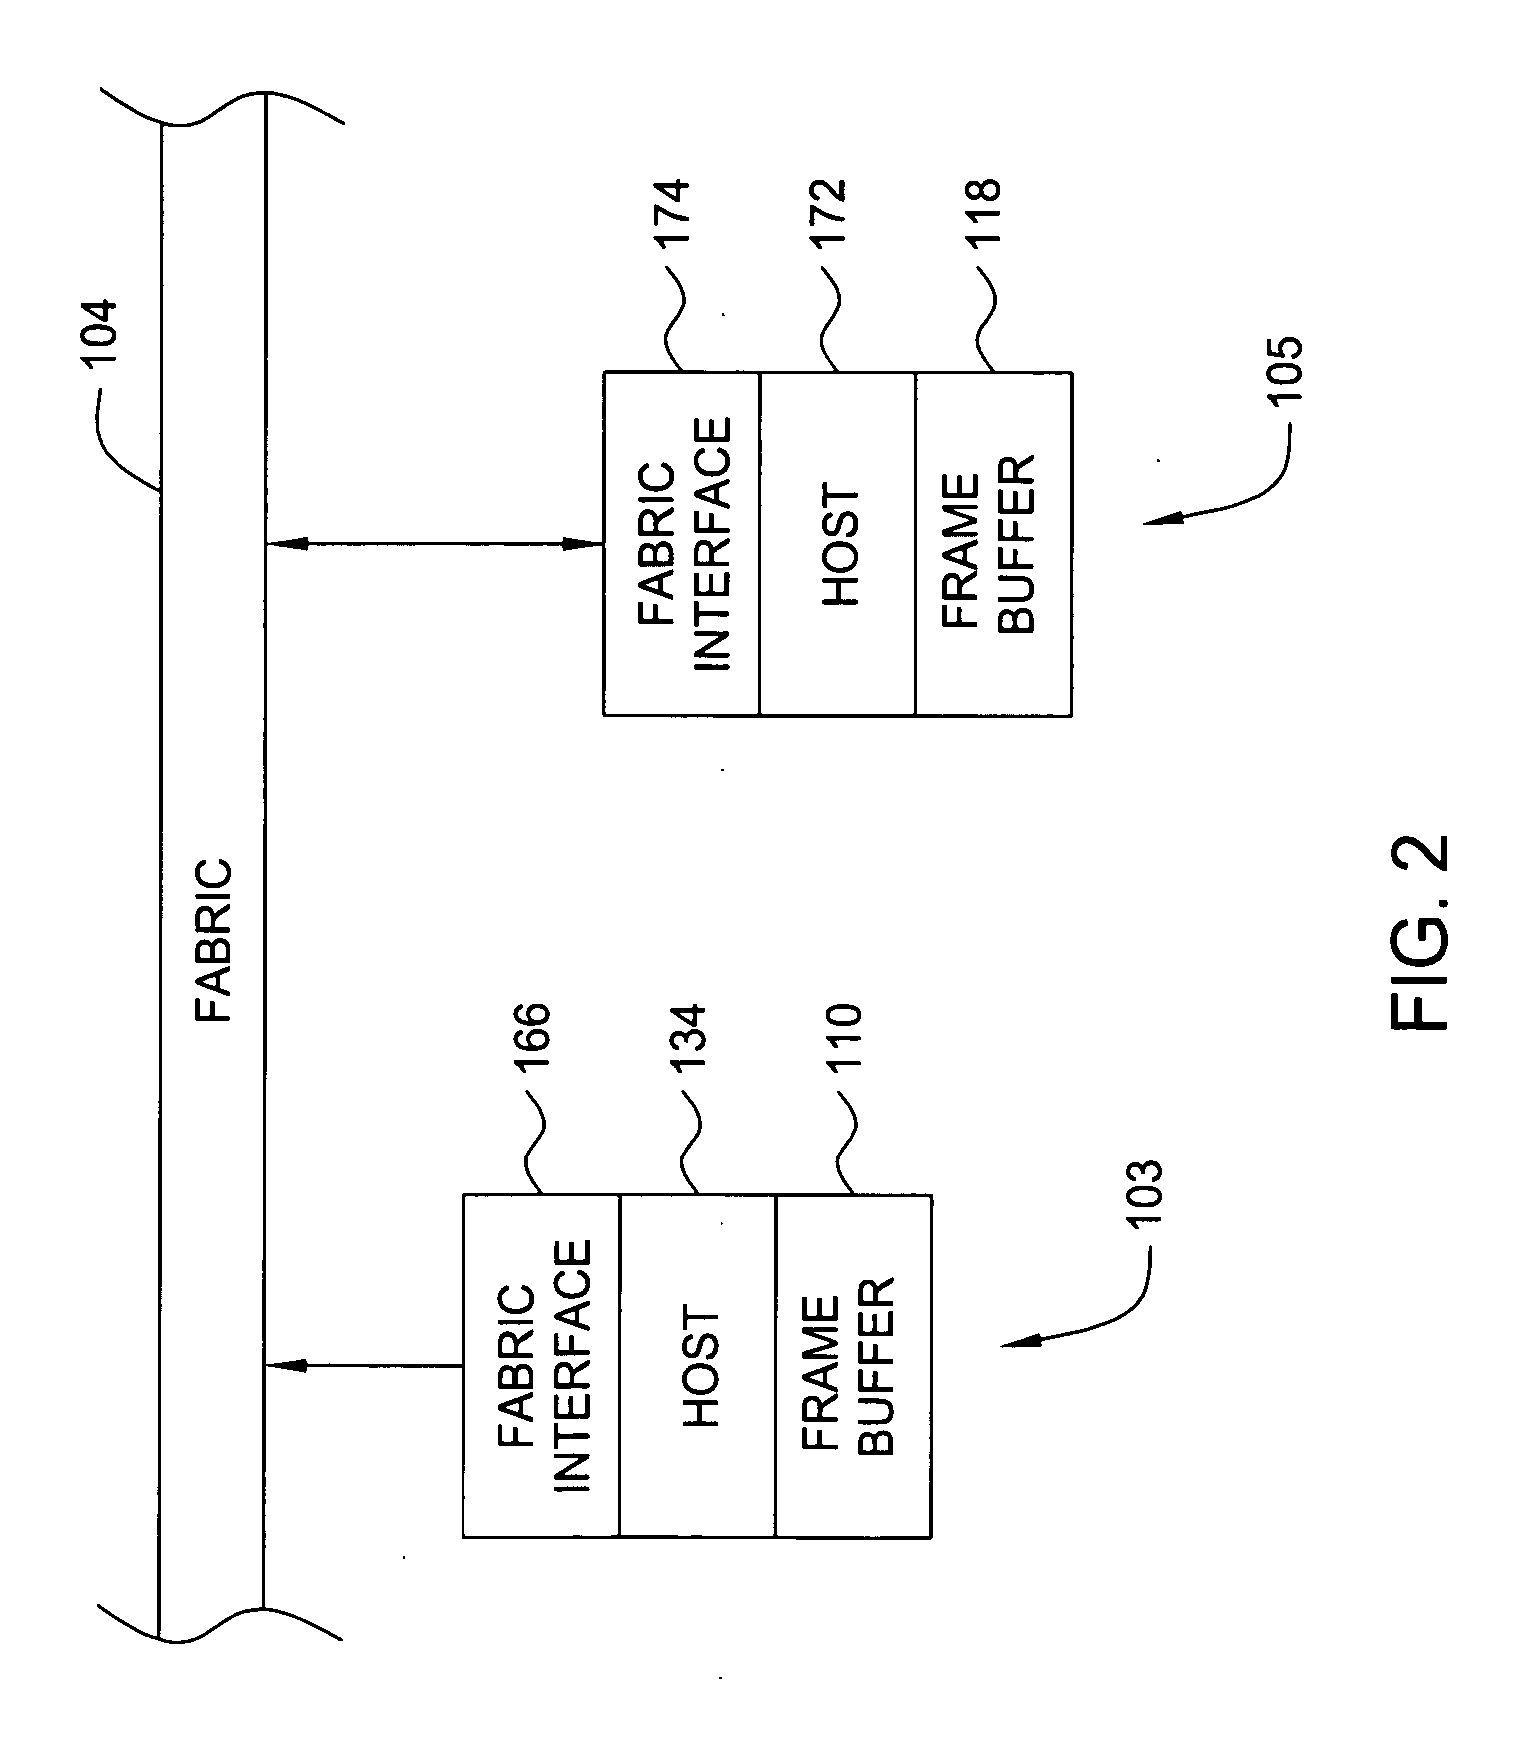 Method and apparatus for providing peer-to-peer data transfer within a computing environment